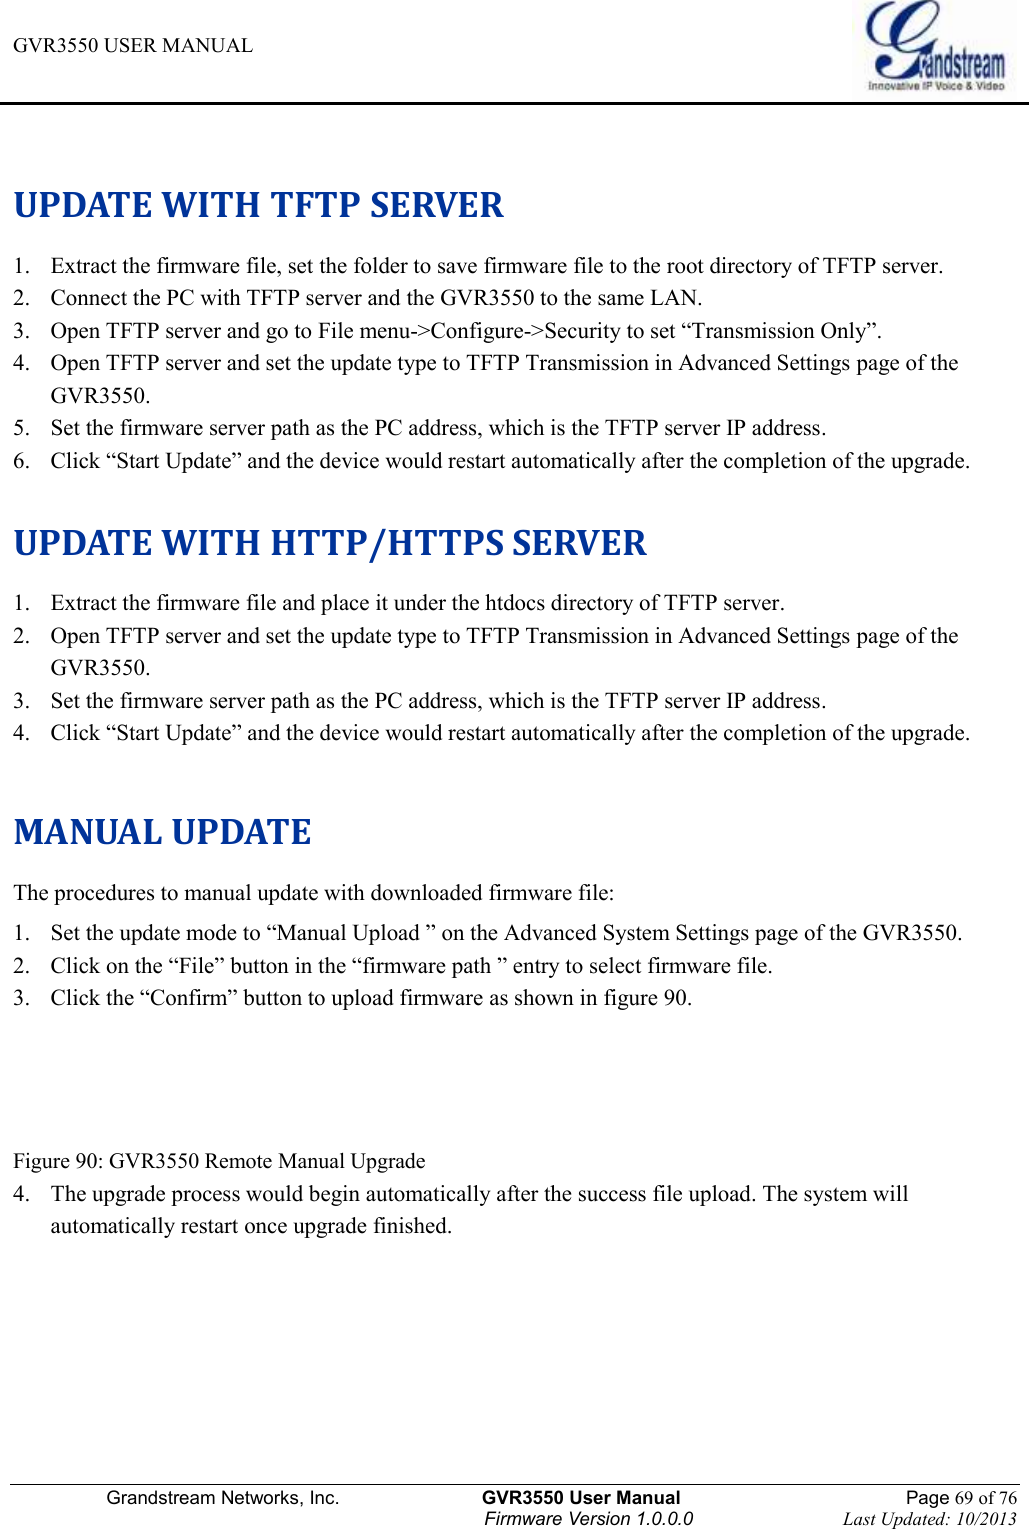 GVR3550 USER MANUAL   Grandstream Networks, Inc.                    GVR3550 User Manual                                                Page 69 of 76 Firmware Version 1.0.0.0                                Last Updated: 10/2013   UPDATE WITH TFTP SERVER 1. Extract the firmware file, set the folder to save firmware file to the root directory of TFTP server. 2. Connect the PC with TFTP server and the GVR3550 to the same LAN. 3. Open TFTP server and go to File menu-&gt;Configure-&gt;Security to set “Transmission Only”. 4. Open TFTP server and set the update type to TFTP Transmission in Advanced Settings page of the GVR3550. 5. Set the firmware server path as the PC address, which is the TFTP server IP address. 6. Click “Start Update” and the device would restart automatically after the completion of the upgrade.  UPDATE WITH HTTP/HTTPS SERVER 1. Extract the firmware file and place it under the htdocs directory of TFTP server. 2. Open TFTP server and set the update type to TFTP Transmission in Advanced Settings page of the GVR3550. 3. Set the firmware server path as the PC address, which is the TFTP server IP address. 4. Click “Start Update” and the device would restart automatically after the completion of the upgrade.  MANUAL UPDATE The procedures to manual update with downloaded firmware file: 1. Set the update mode to “Manual Upload ” on the Advanced System Settings page of the GVR3550. 2. Click on the “File” button in the “firmware path ” entry to select firmware file. 3. Click the “Confirm” button to upload firmware as shown in figure 90.    Figure 90: GVR3550 Remote Manual Upgrade 4. The upgrade process would begin automatically after the success file upload. The system will automatically restart once upgrade finished.      